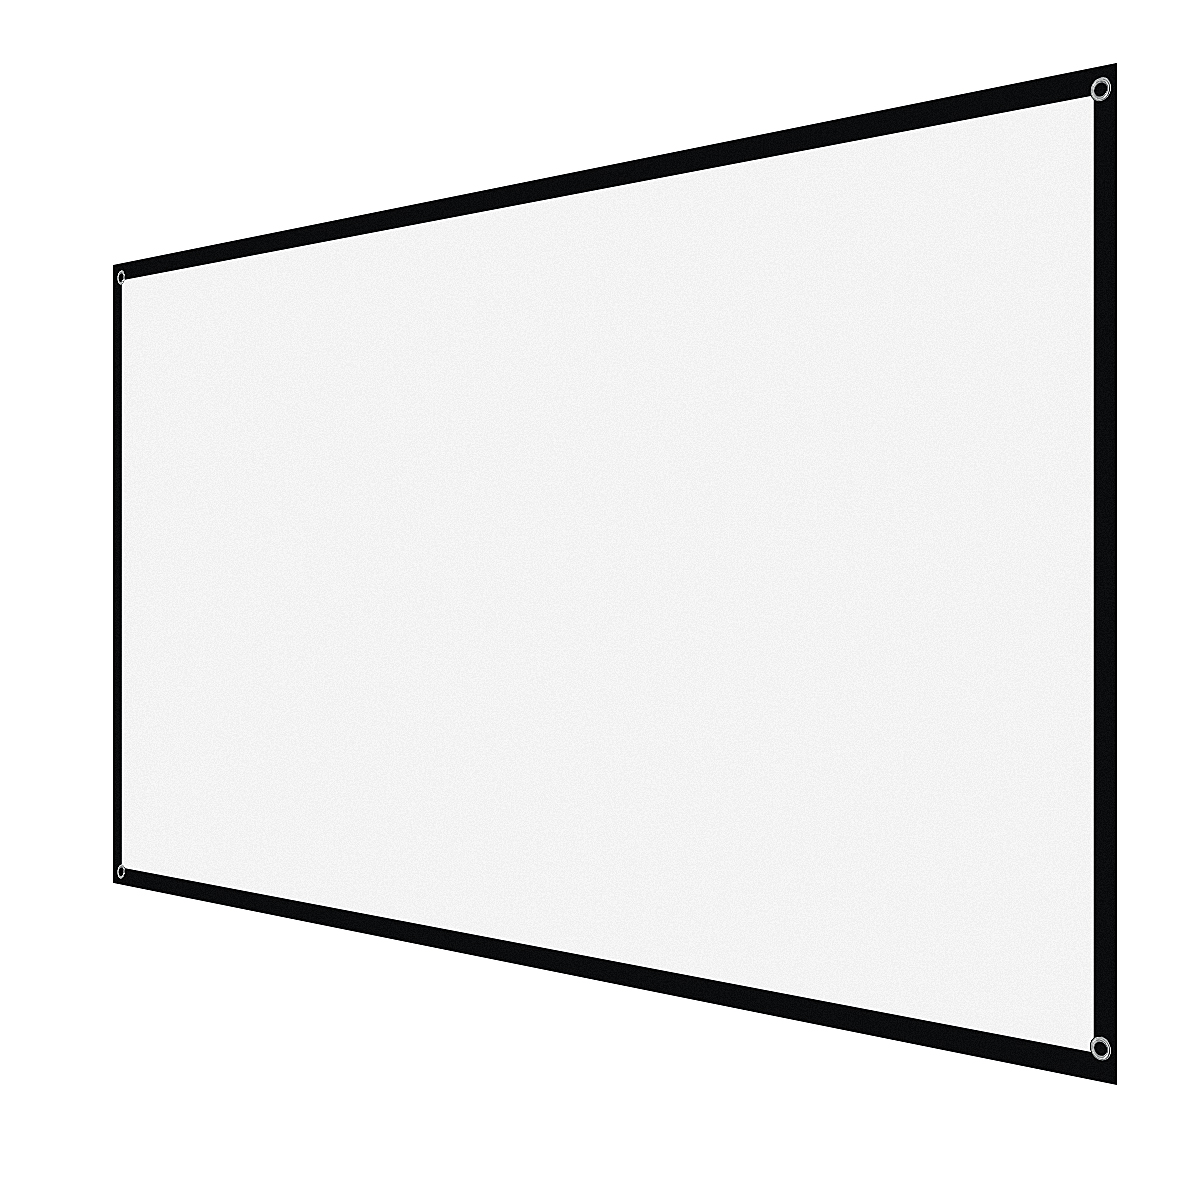 Find 60 inch Projector Screen 4 3 / 16 9 HD Foldable White Projection Wall Mounted Screen for Home Office Theater Movies Indoors Outdoors for Sale on Gipsybee.com with cryptocurrencies